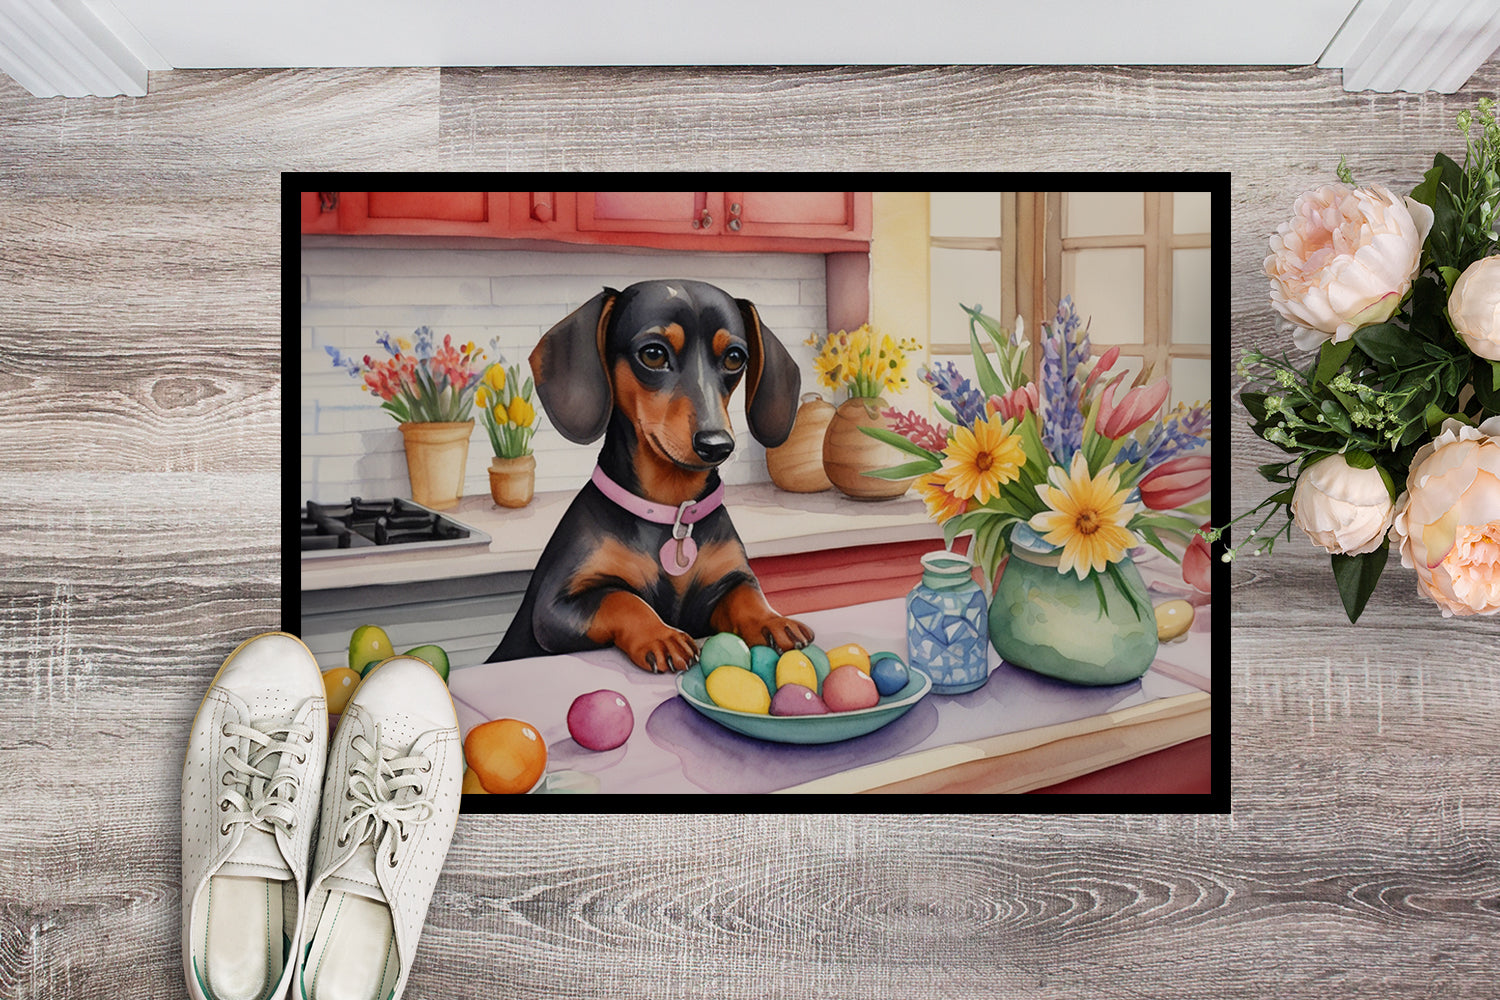 Buy this Decorating Easter Dachshund Doormat